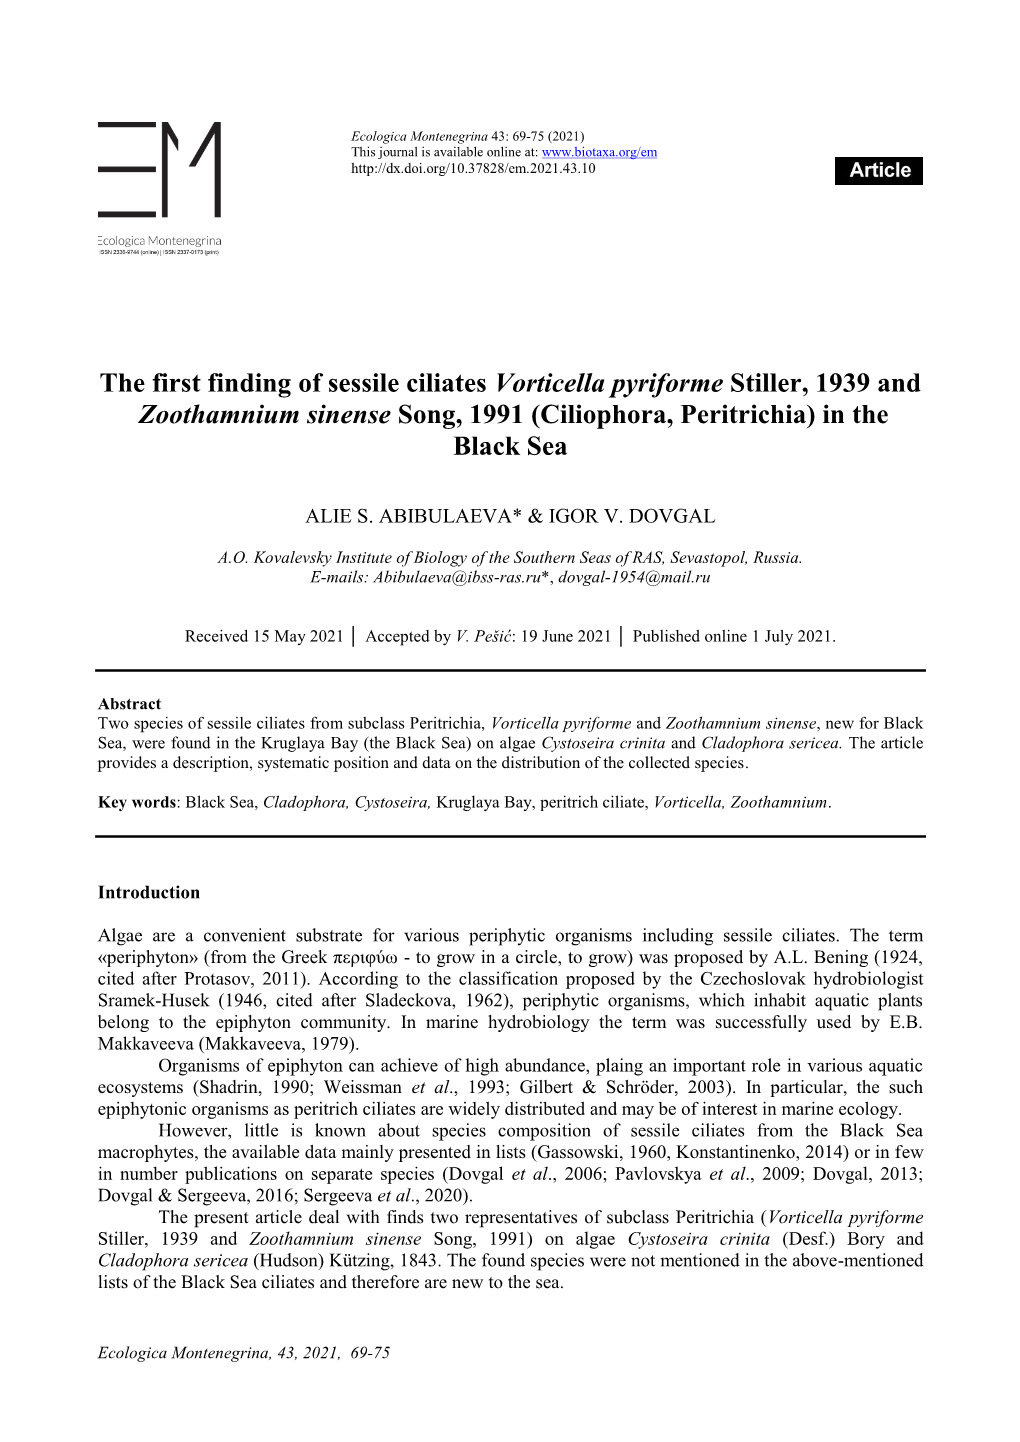 The First Finding of Sessile Ciliates Vorticella Pyriforme Stiller, 1939 and Zoothamnium Sinense Song, 1991 (Ciliophora, Peritrichia) in the Black Sea